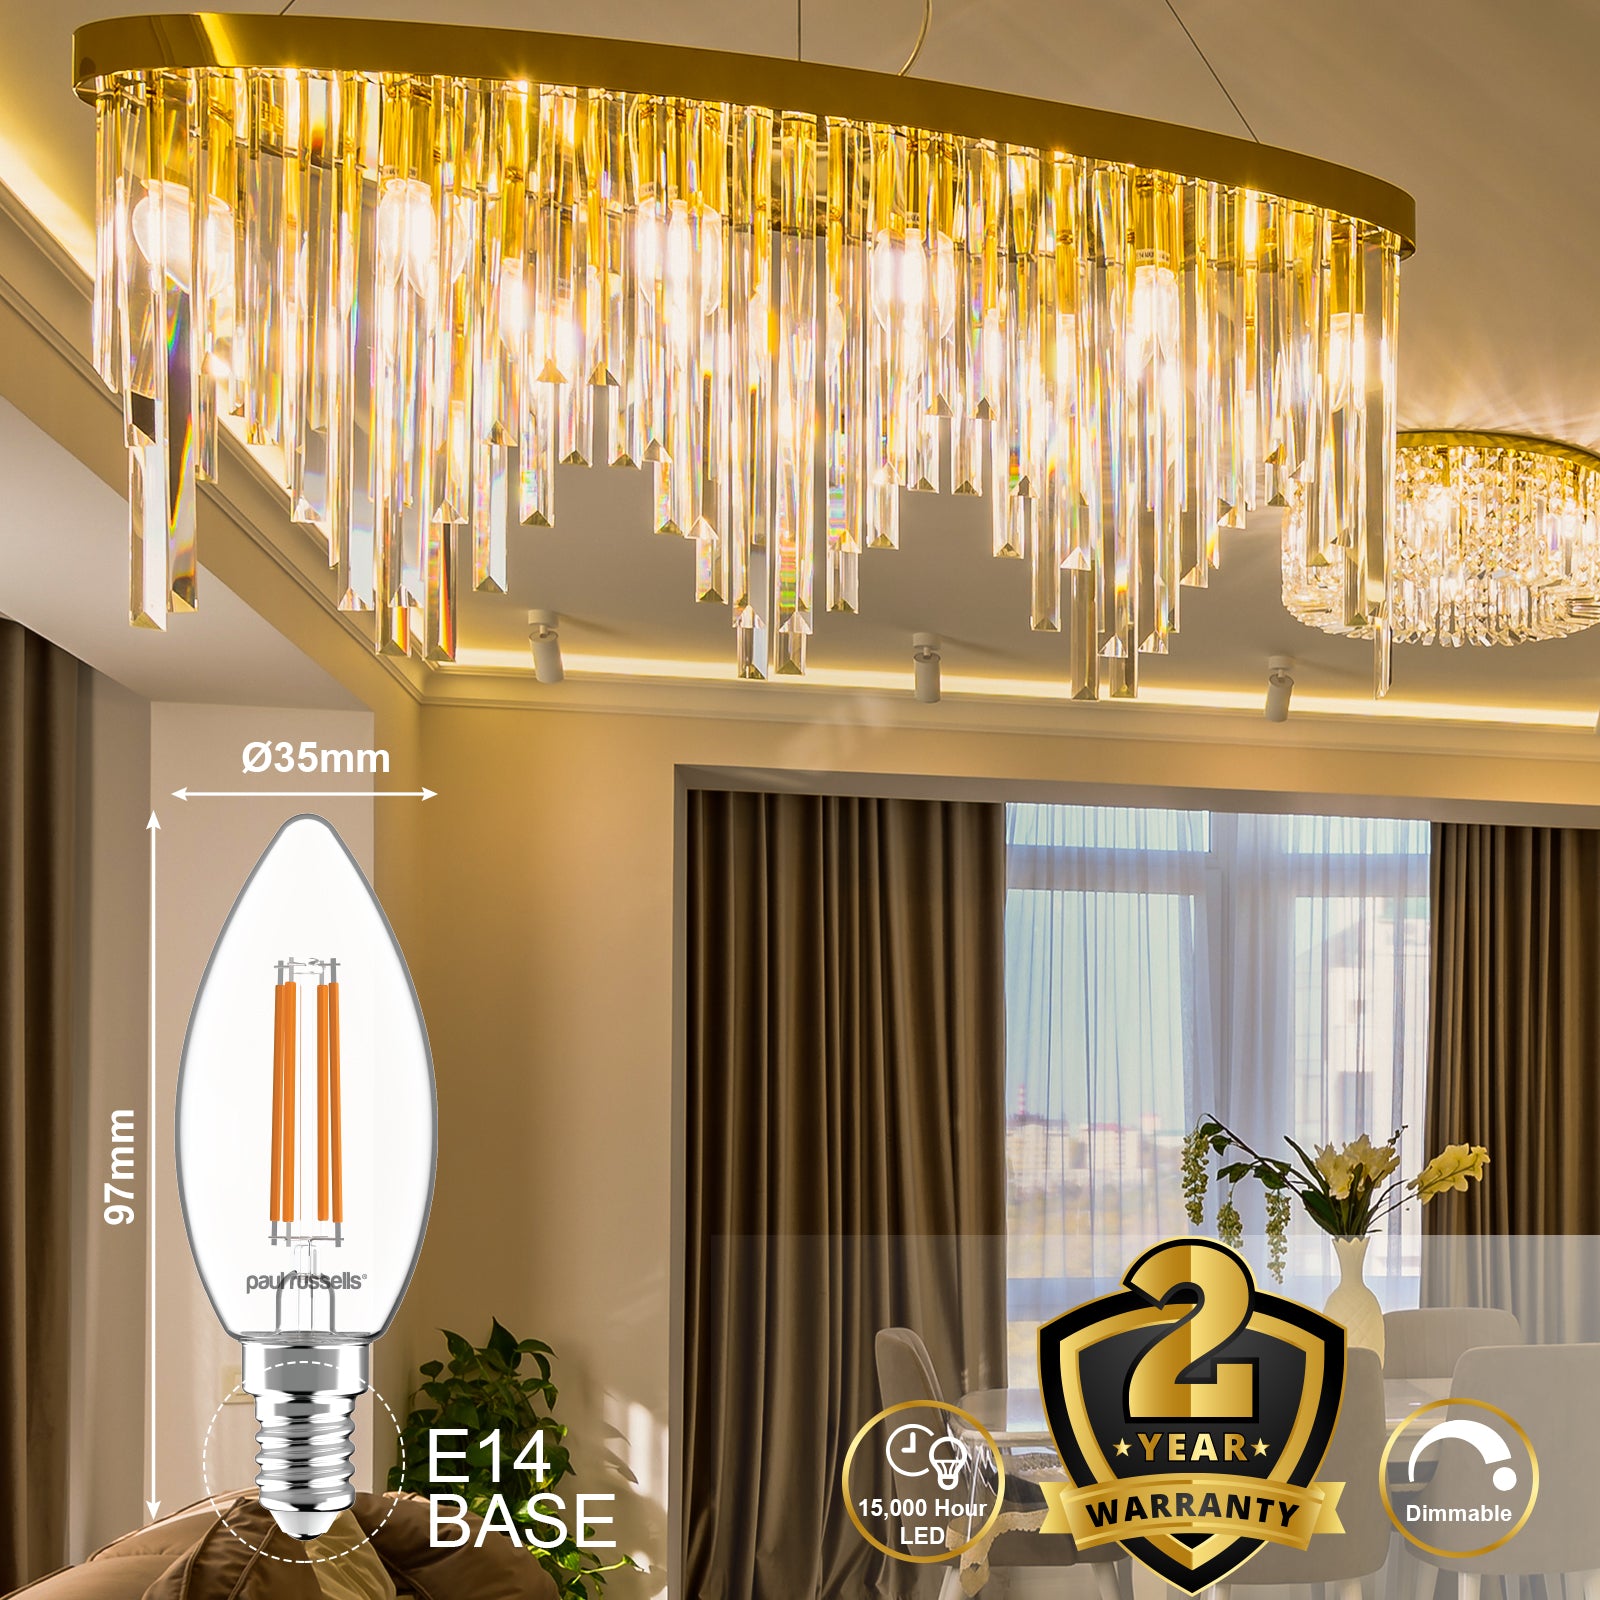 LED Dimmable Filament Candle 4.5W (40w), SES/E14, 423 Lumens, Warm White(2700K), 240V